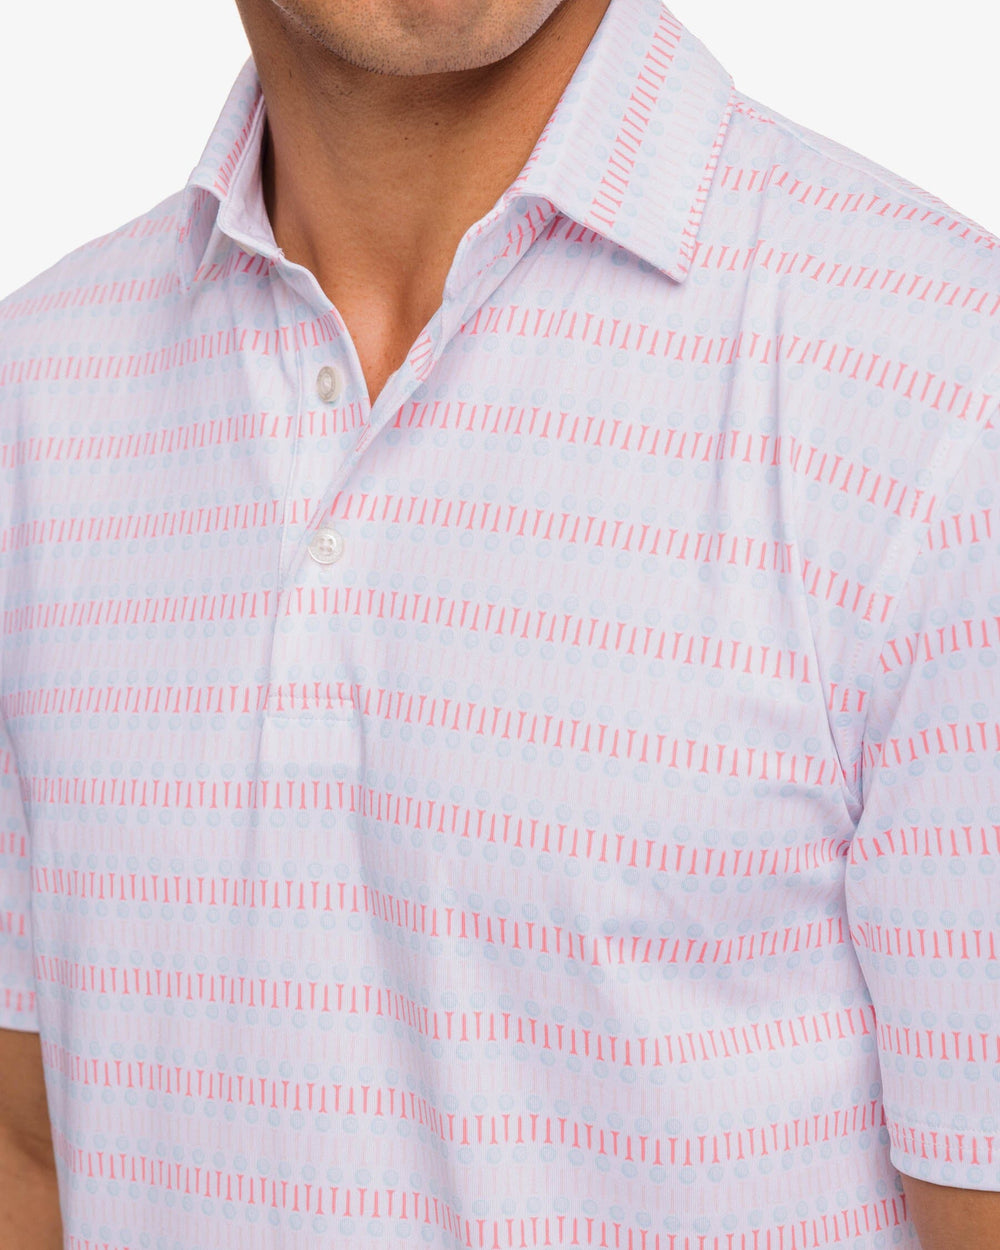 The detail view of the Southern Tide Driver Best Ball Print Performance Polo Shirt by Southern Tide - Classic White